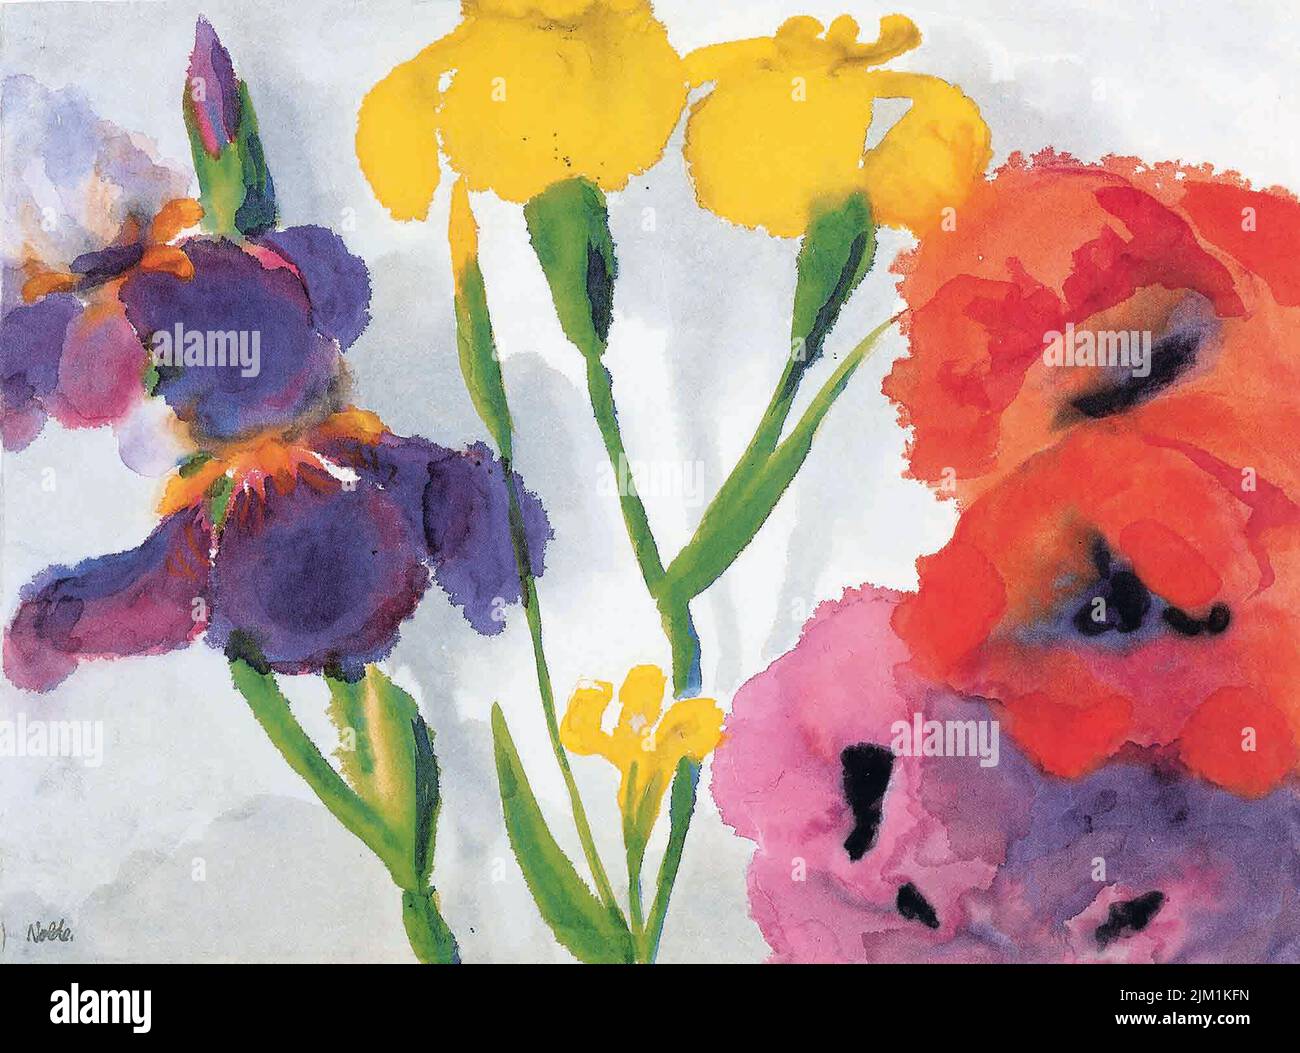 Irises and poppies. Museum: Nolde Stiftung Seebüll. Author: EMIL NOLDE. Stock Photo